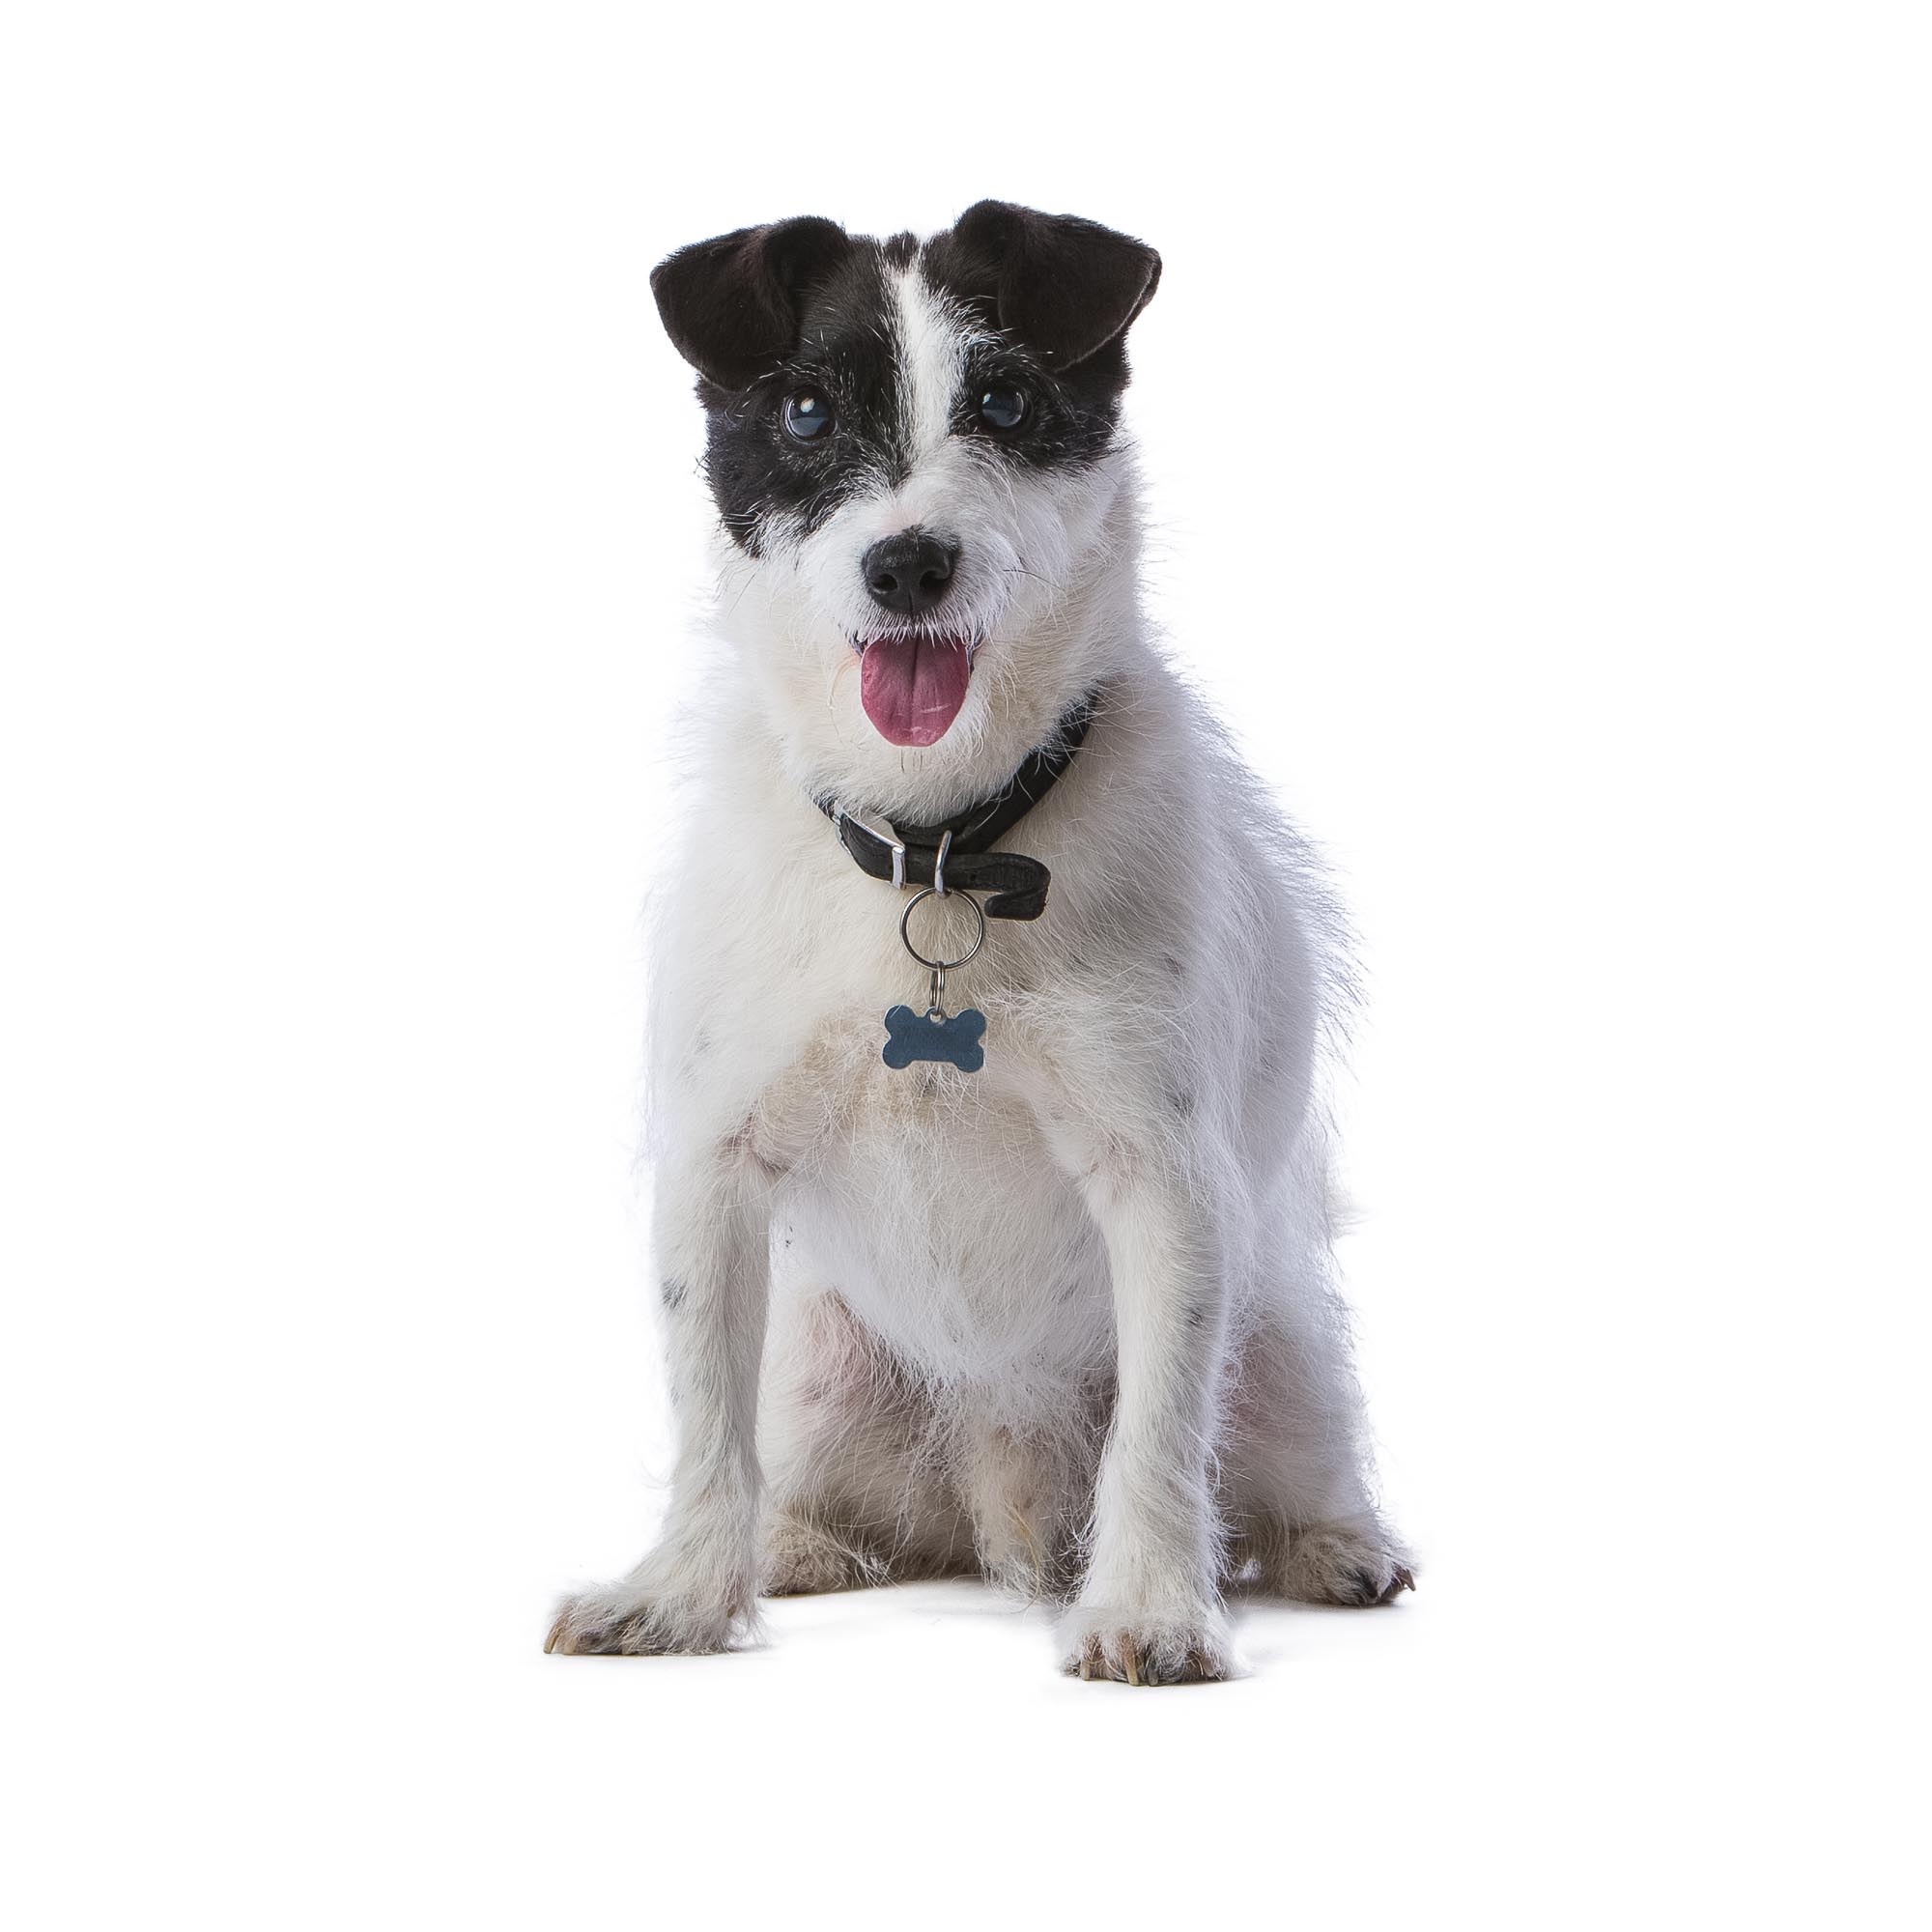 Jack Russell Terrier portrait by Mark Hewitson Photography of Thame